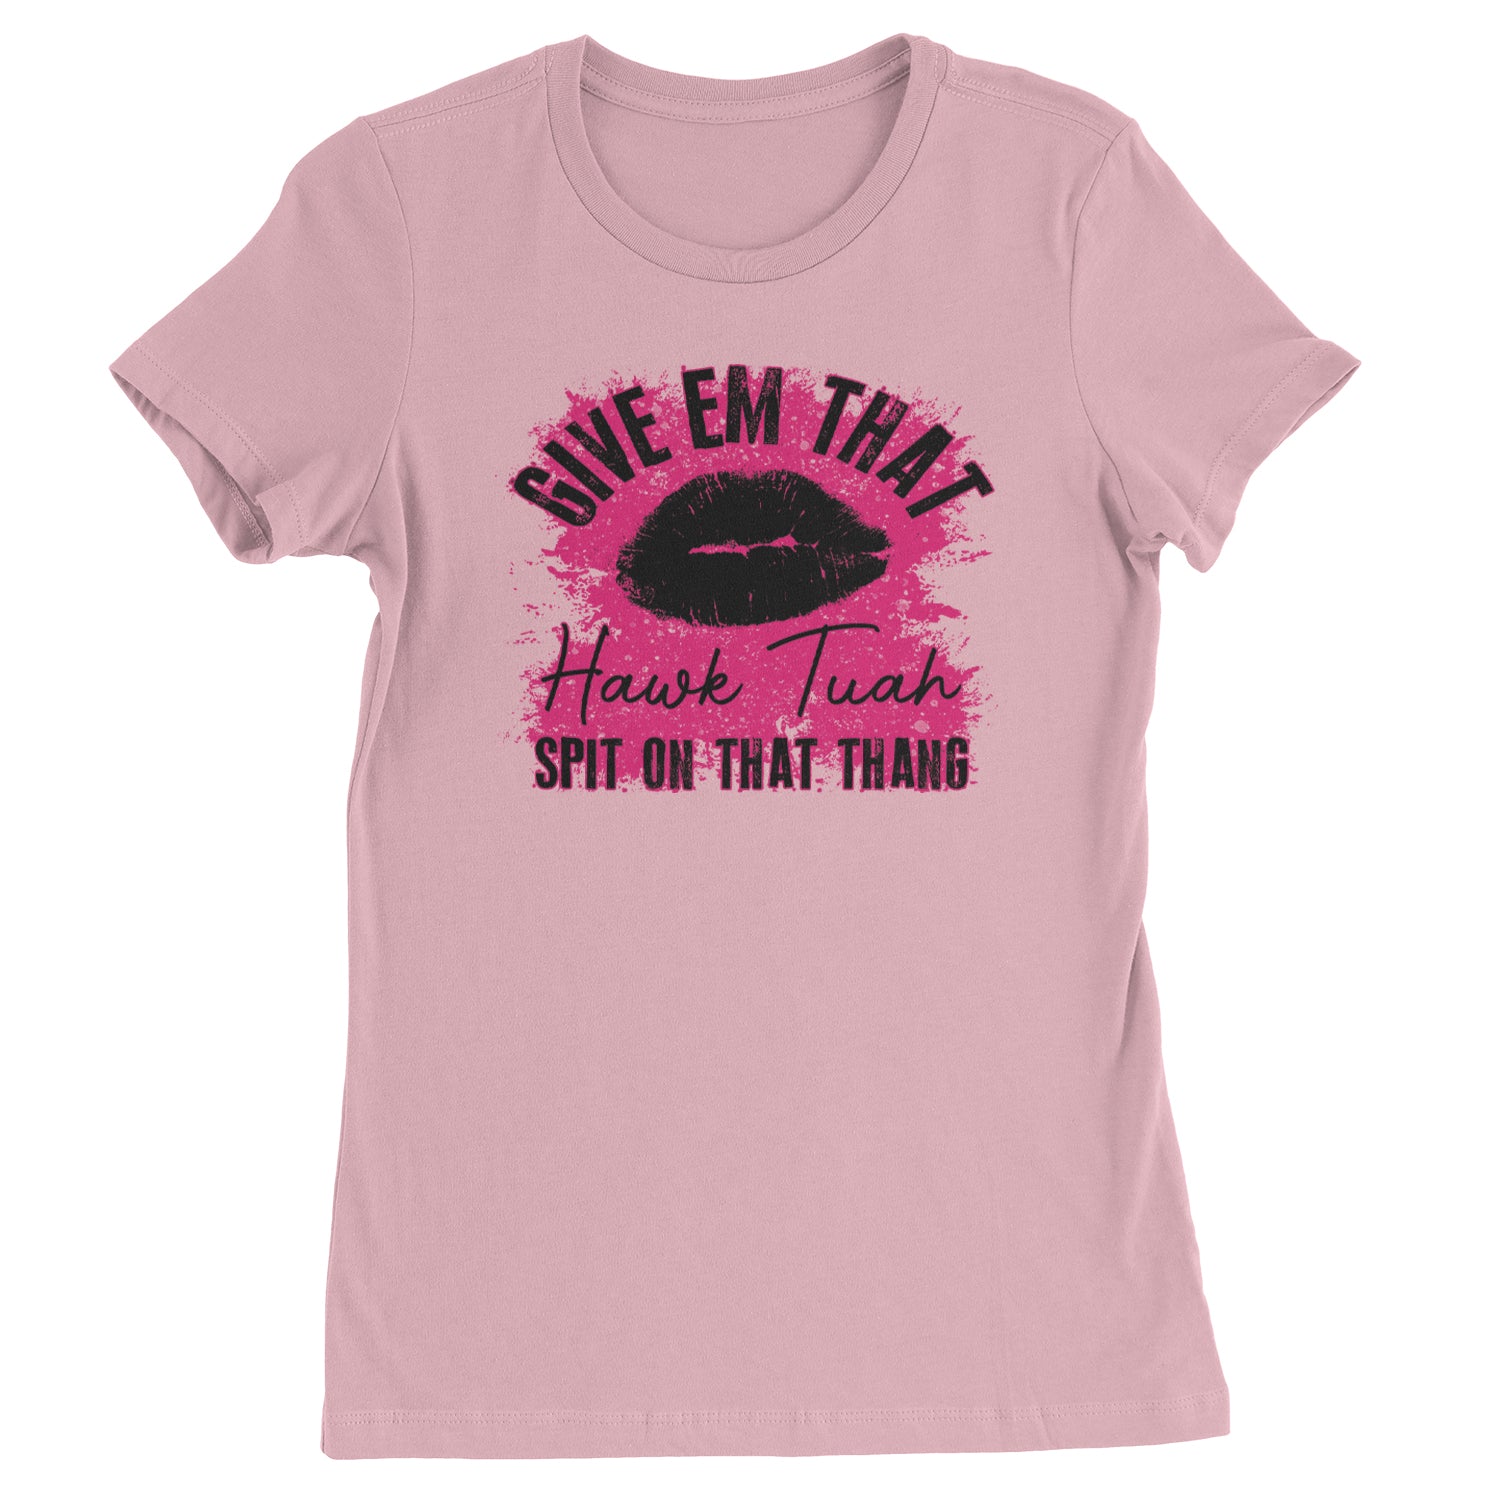 Give 'Em Hawk Tuah Spit On That Thang Womens T-shirt Light Pink